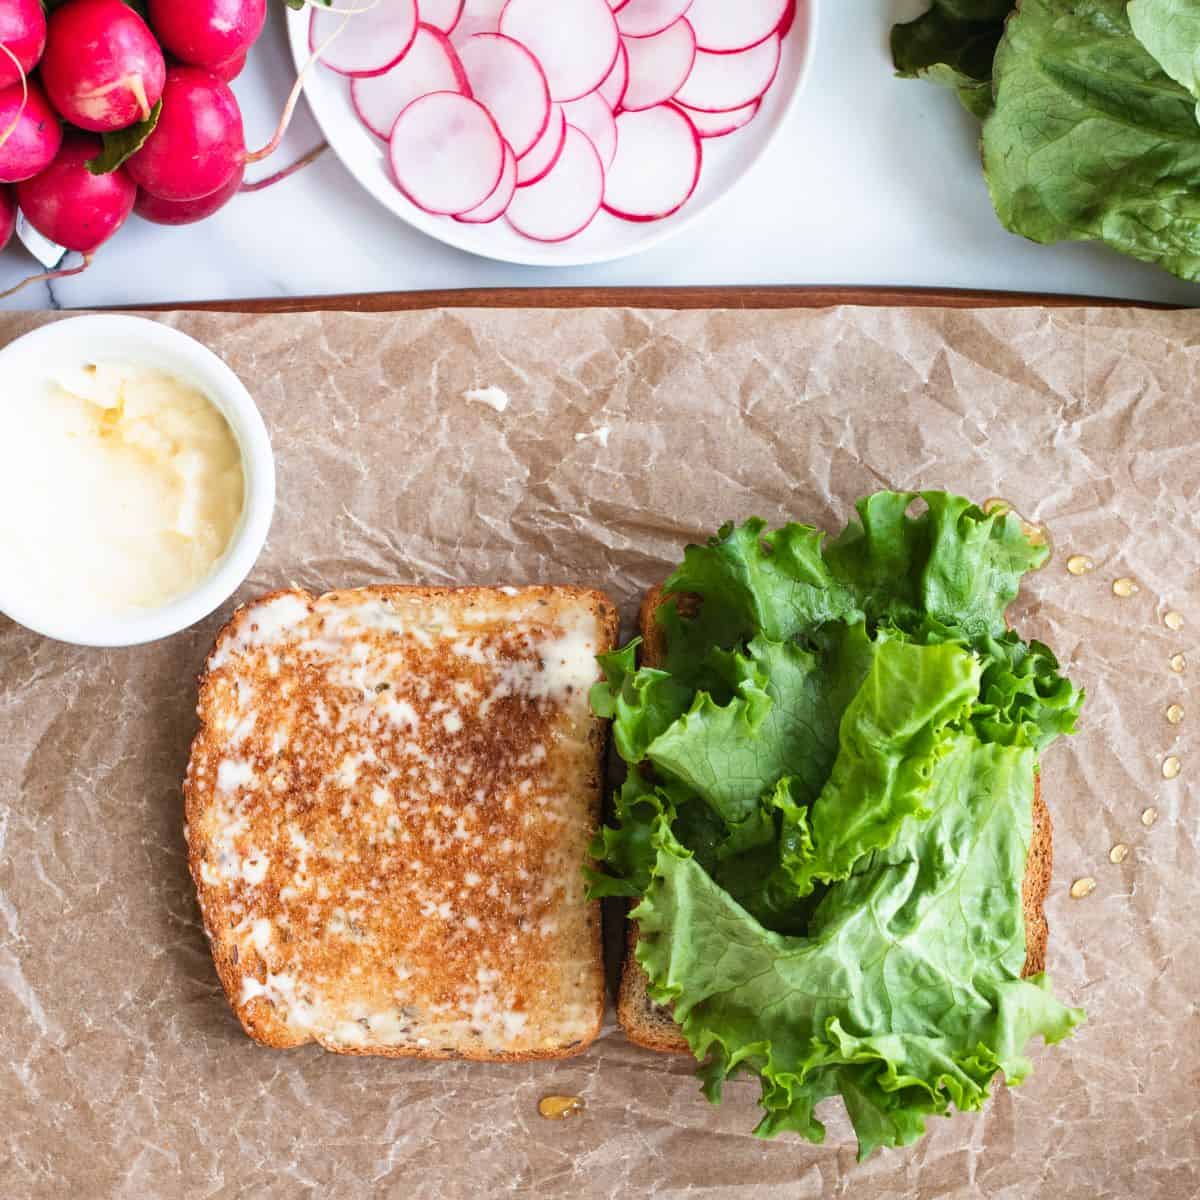 Toasted bread on parchment paper on a staged tabletop buttered, with big lettuce leaves on top.